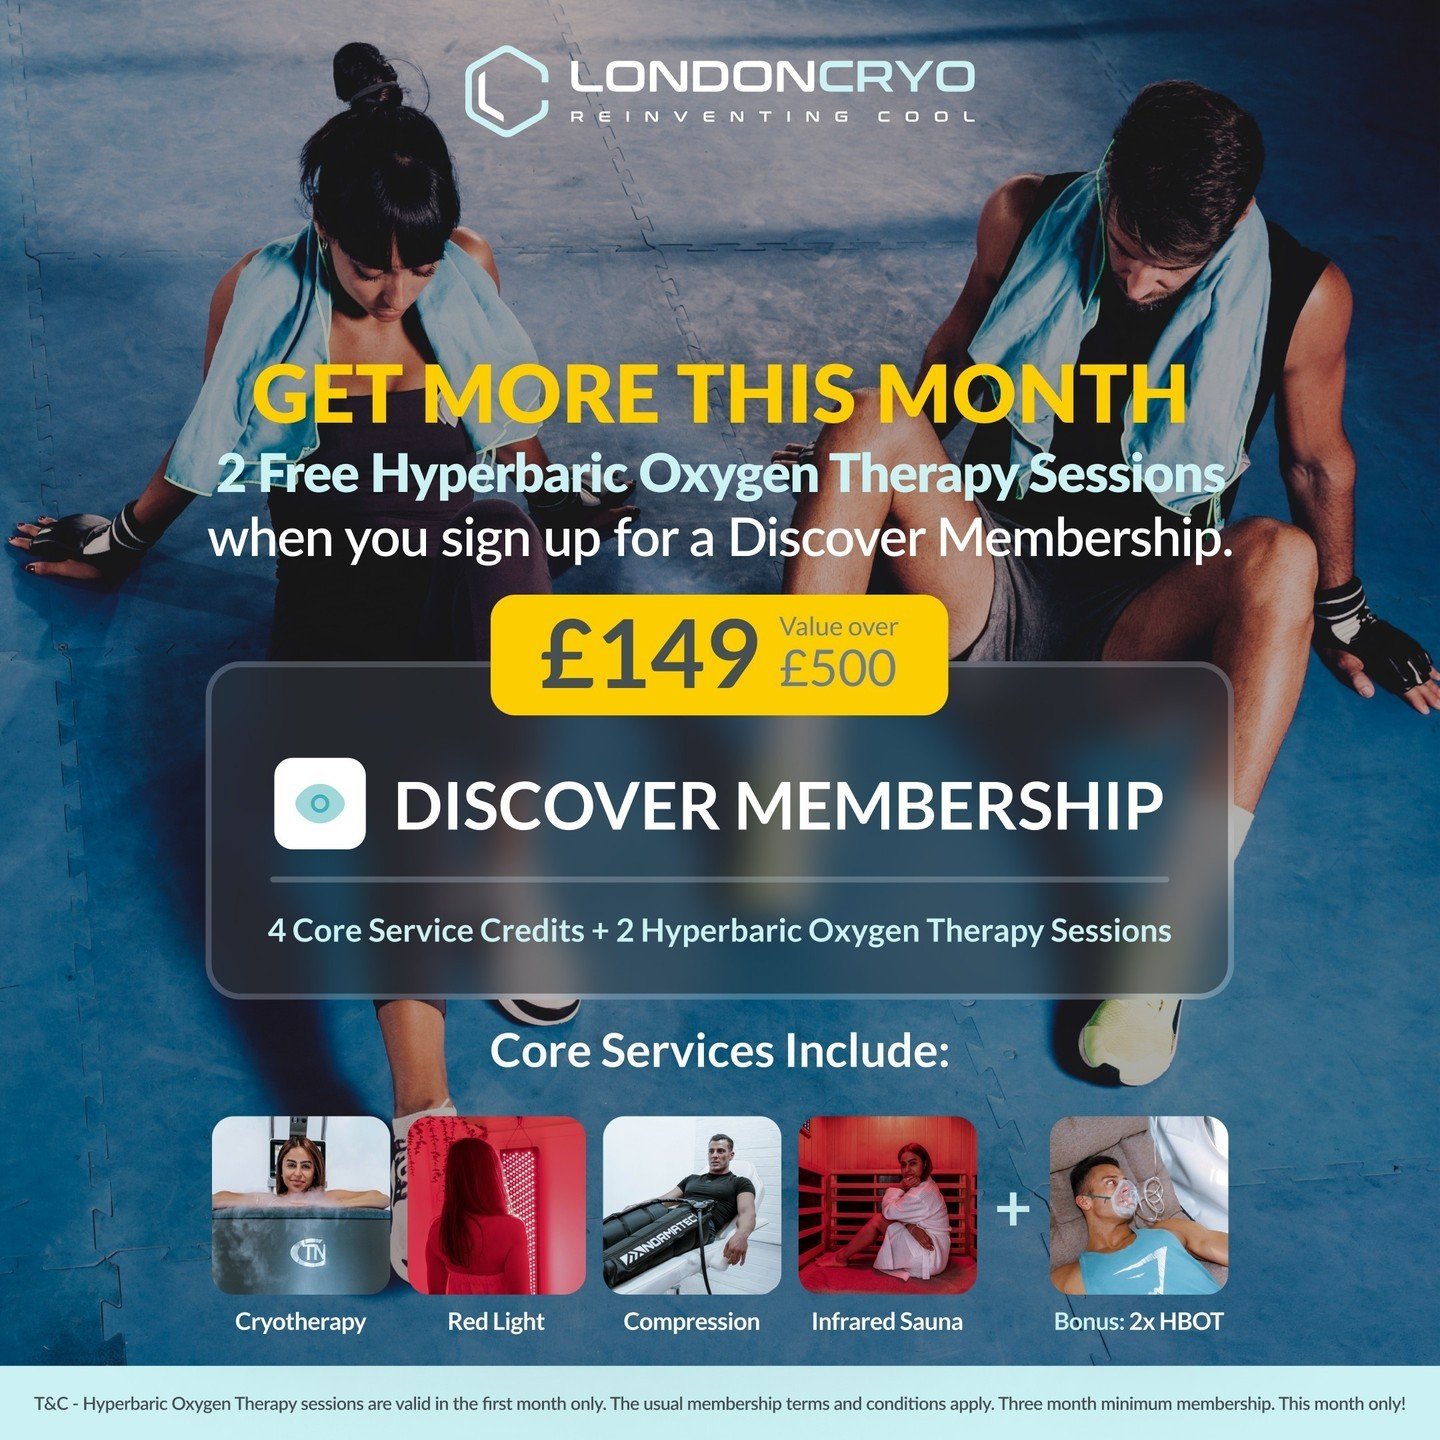 🌟 Get More This Month! 🌟⁠
⁠
Sign up for our Discover Membership and unlock 2 free Hyperbaric Oxygen Therapy Sessions! 💫⁠
⁠
For just &pound;149, get 4 Core Service Credits + 2 HBOT Sessions. Dive into the benefits of Cryotherapy, Red Light, Compres